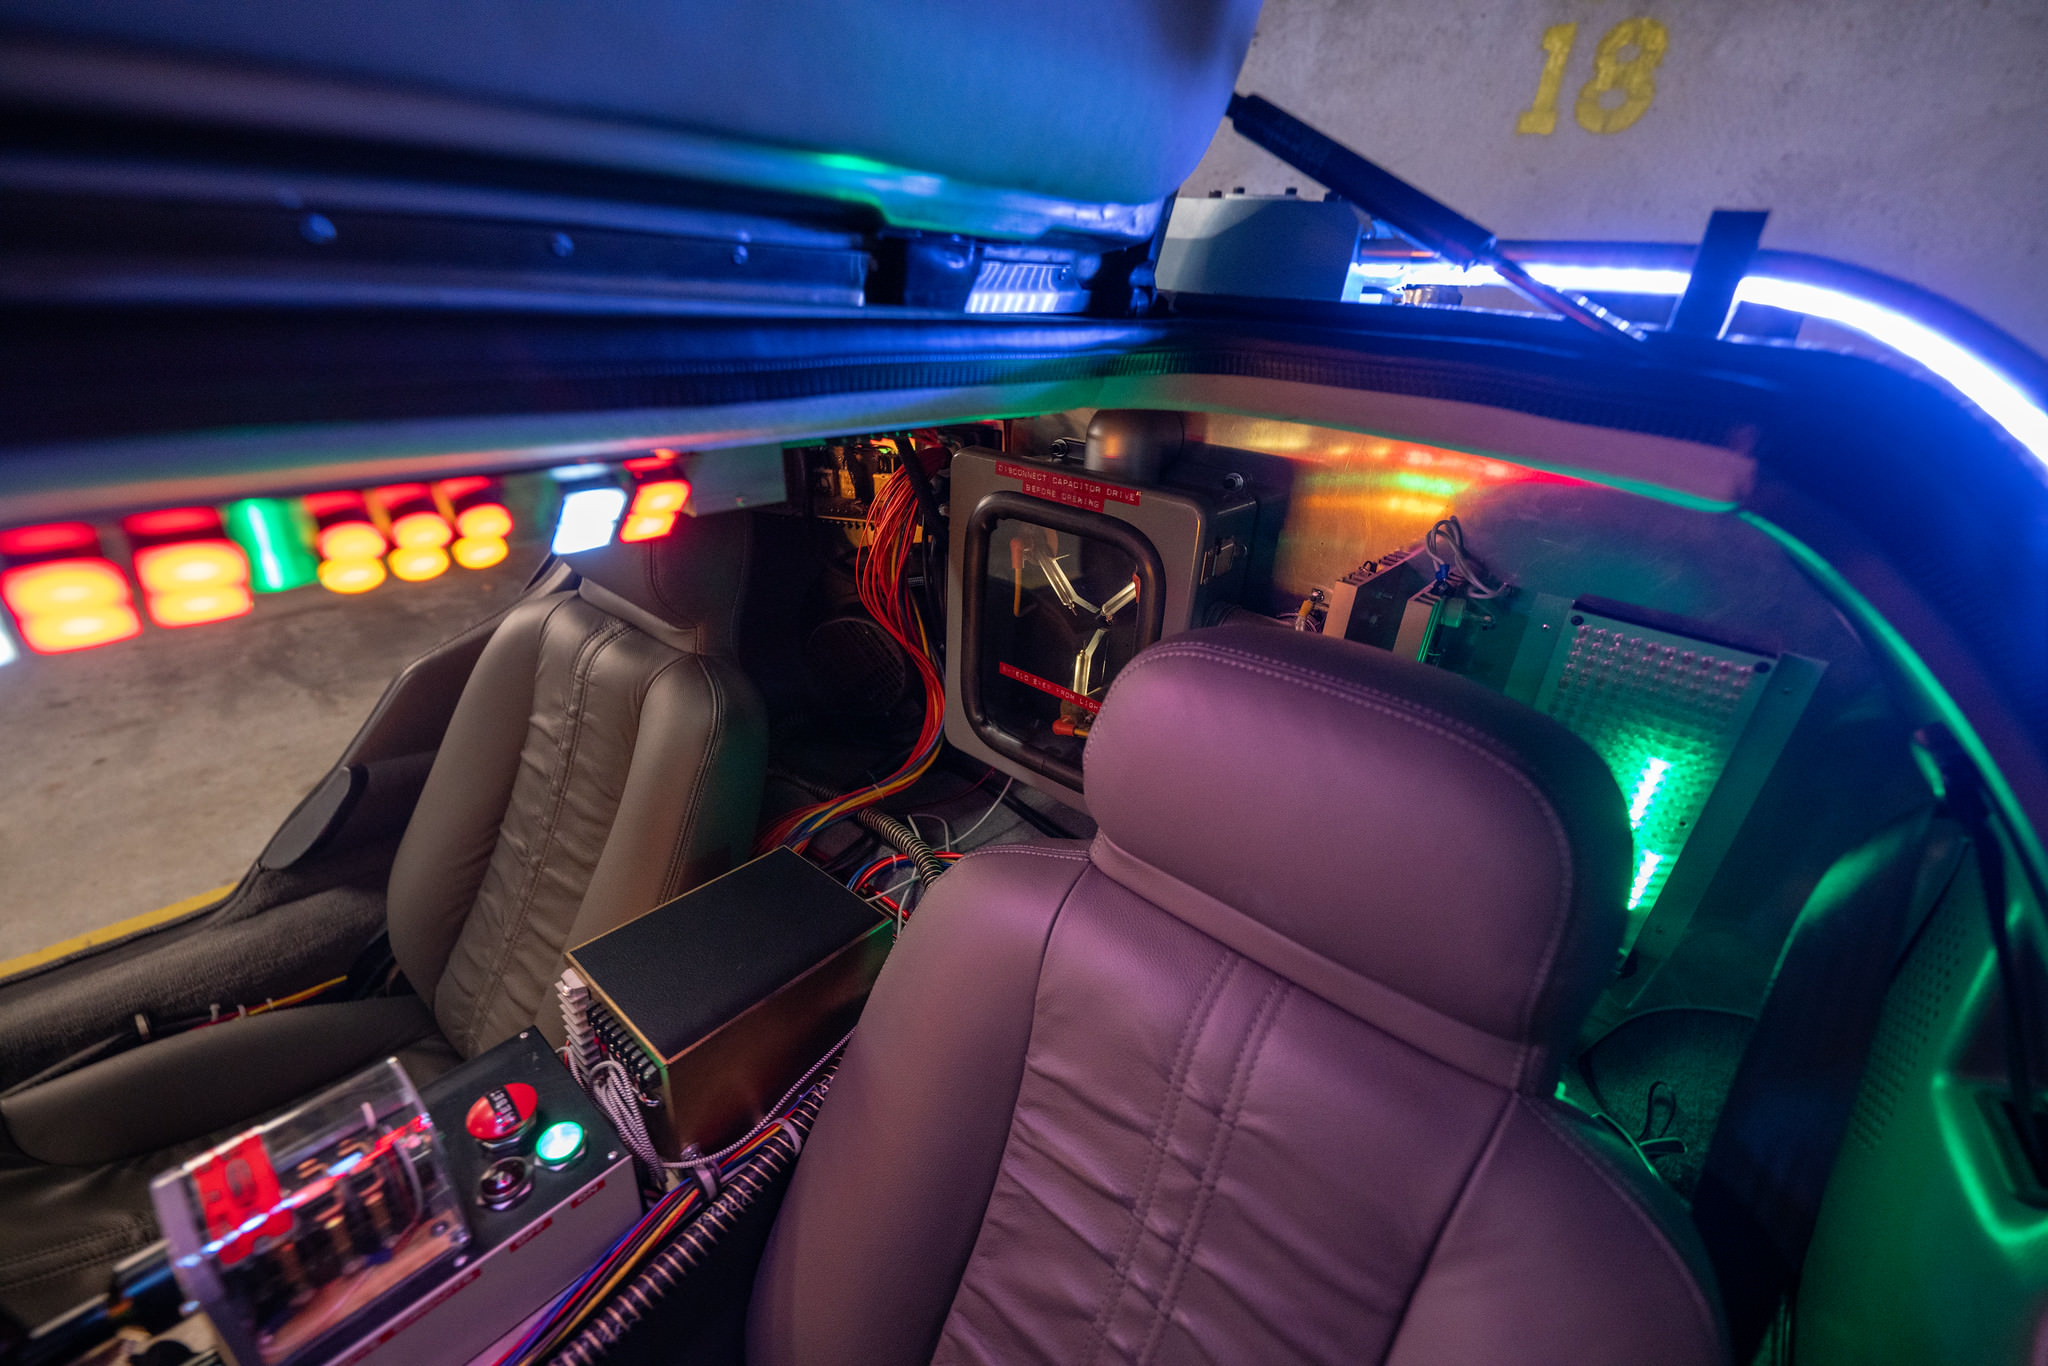 DeLorean 'Time Machine' replica, partial exterior + interior shot: Driver-side gull-wing door, flux bands, time circuit control switch, wiring, flux capacitor and 'christmas tree' LED lights.